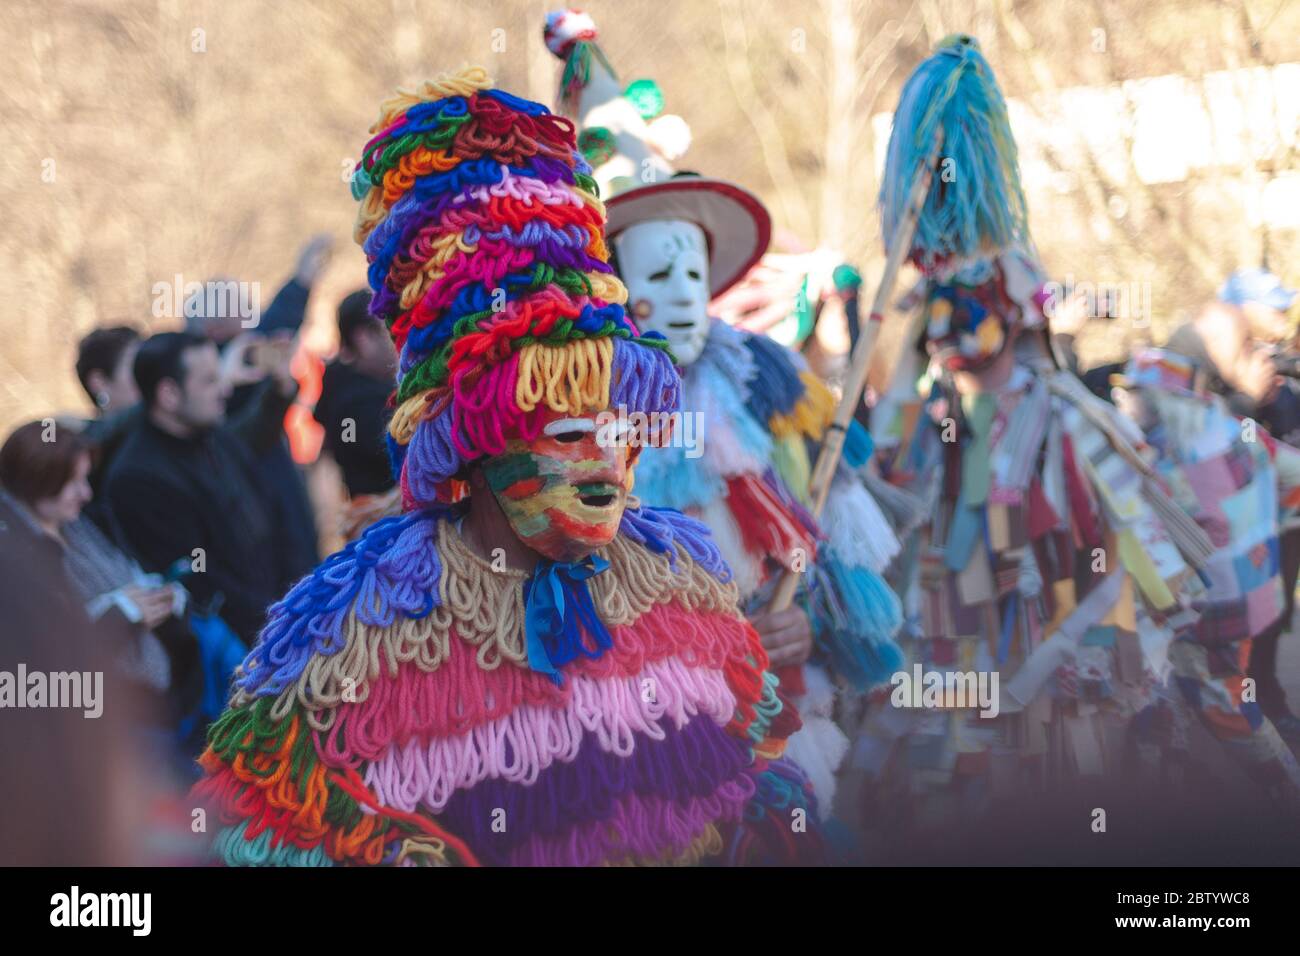 Silió, Cantabria, Spain - January 6, 2019: Vijanera is a winter masquerade that takes place in the Spanish town of Silió, in Cantabria, on the first S Stock Photo